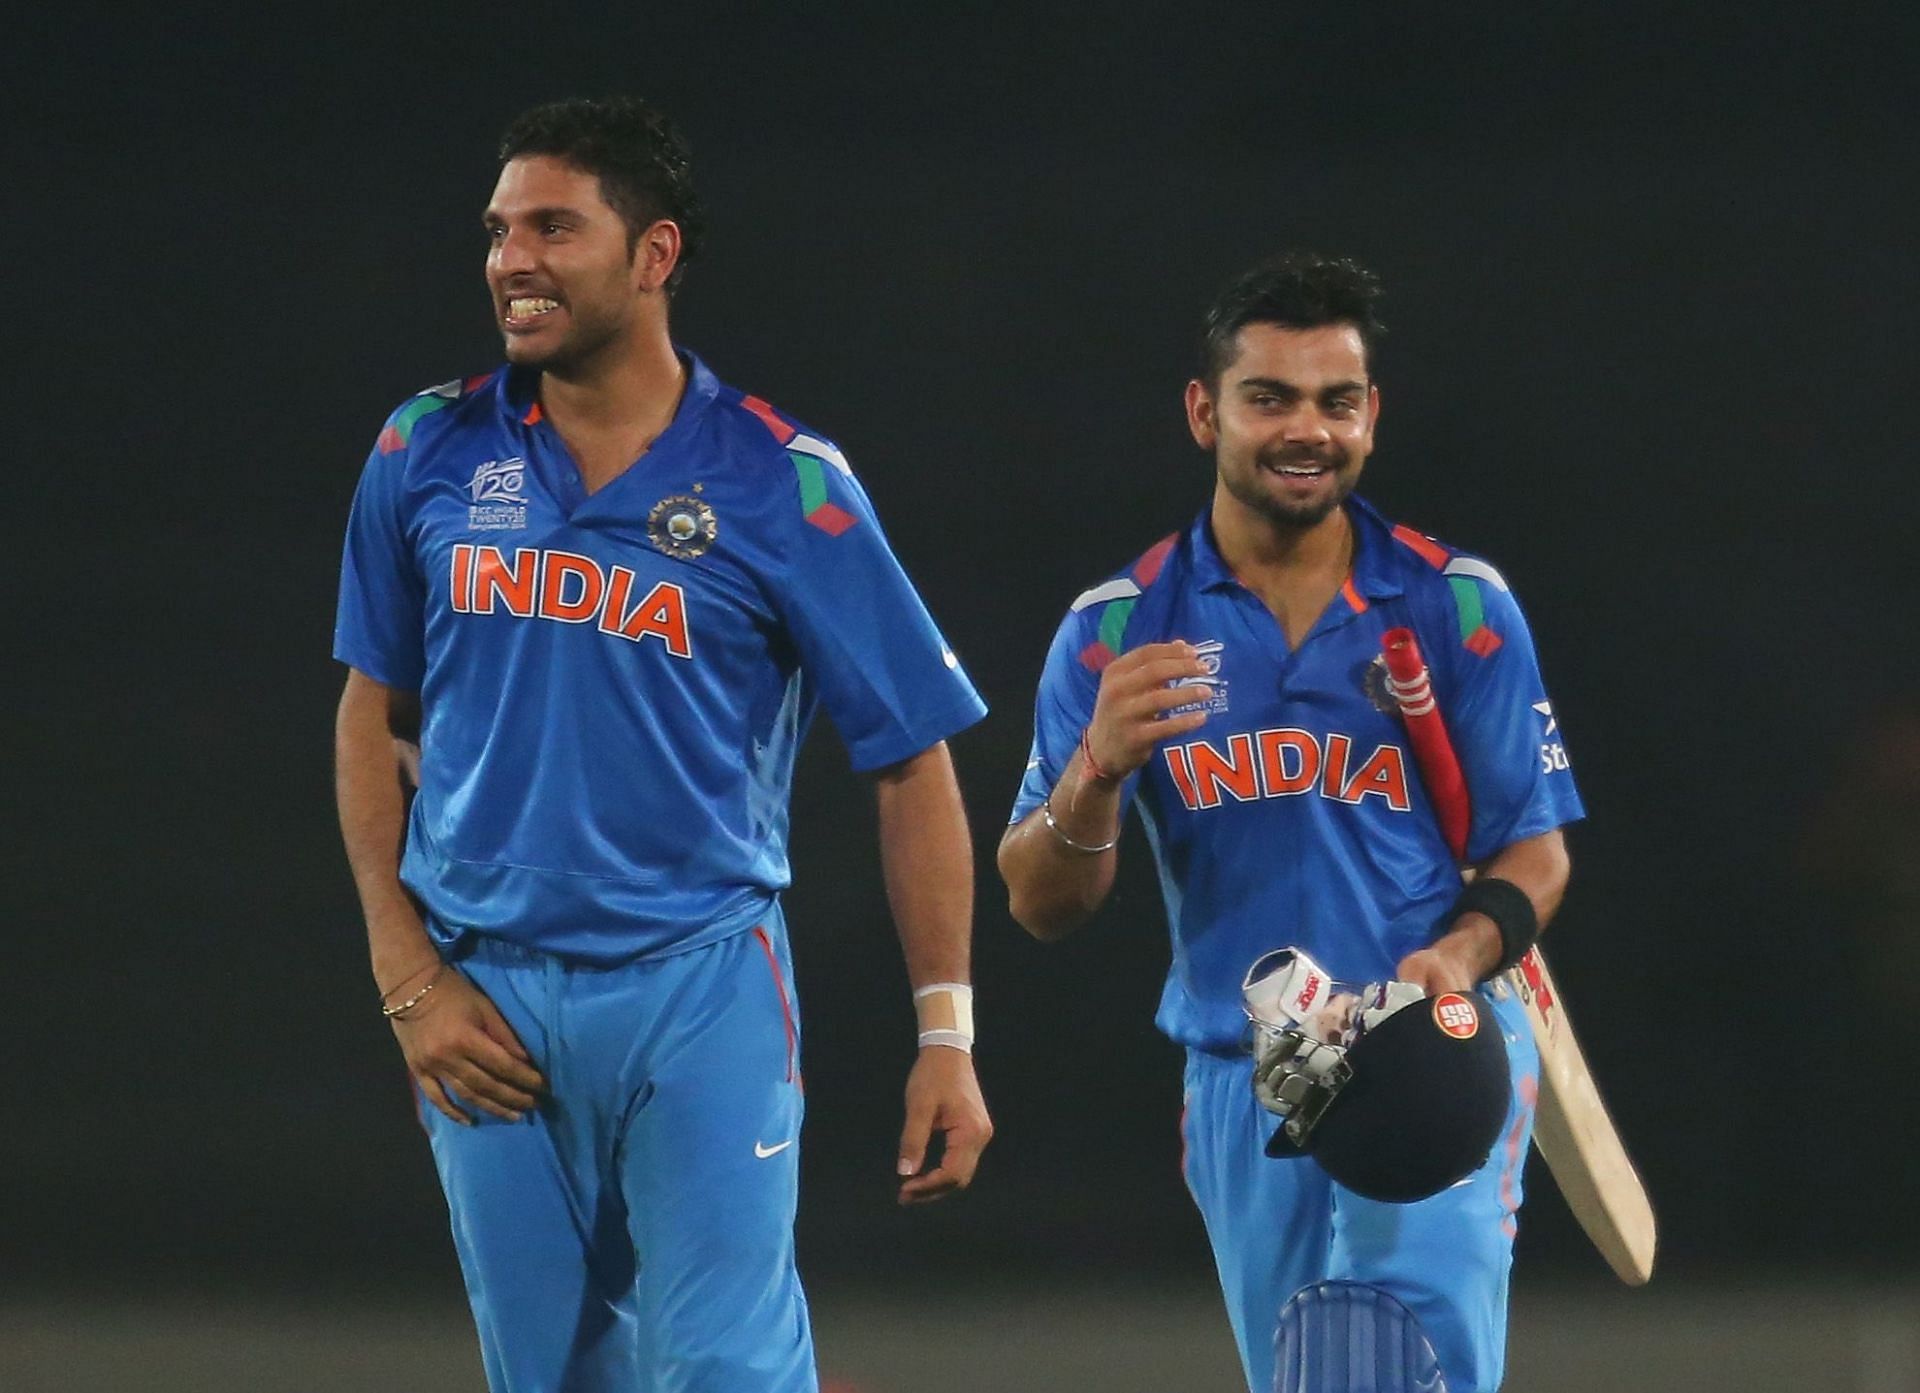 Virat Kohli (right) and Yuvraj Singh during the 2014 T20 World Cup. Pic: Getty Images